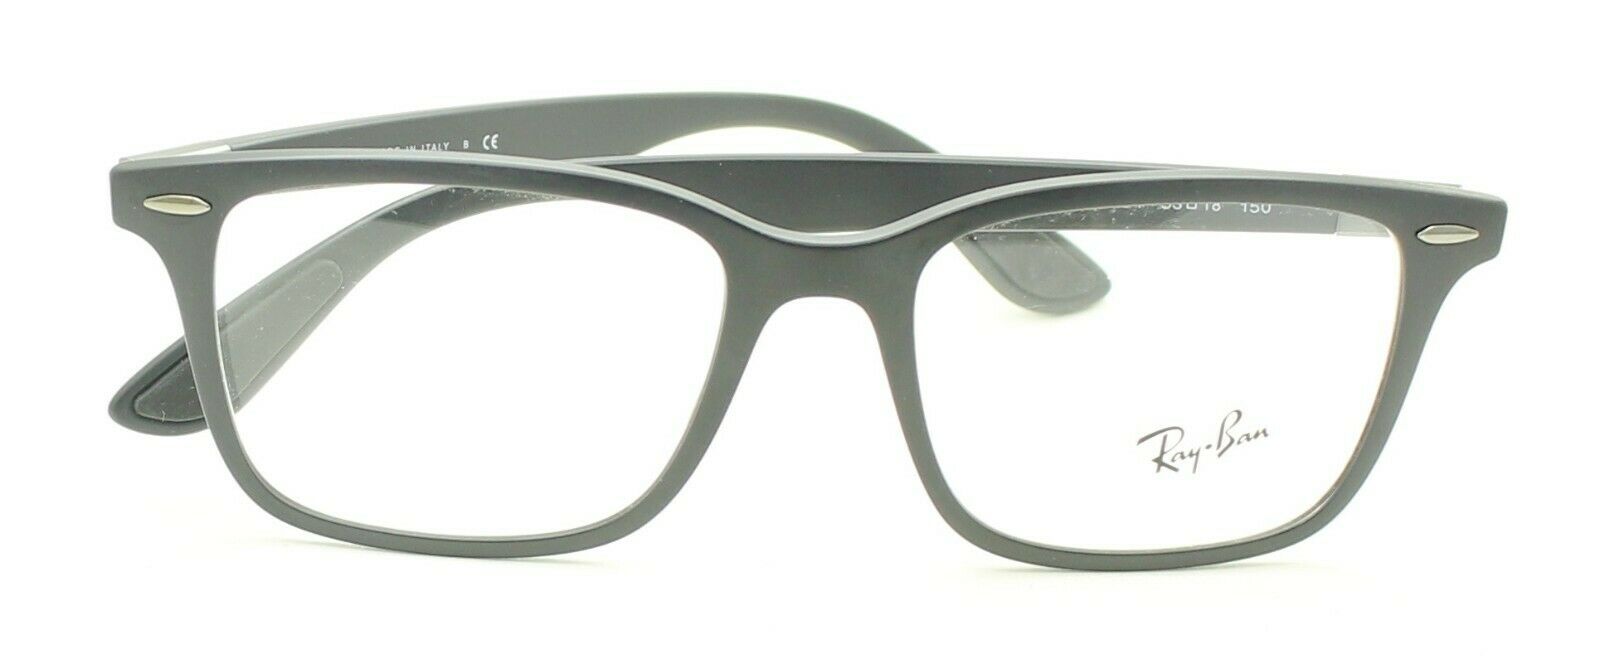 RAY BAN LITEFORCE RB 7144 5204 53mm RX Optical FRAMES RAYBAN Glasses New - Italy